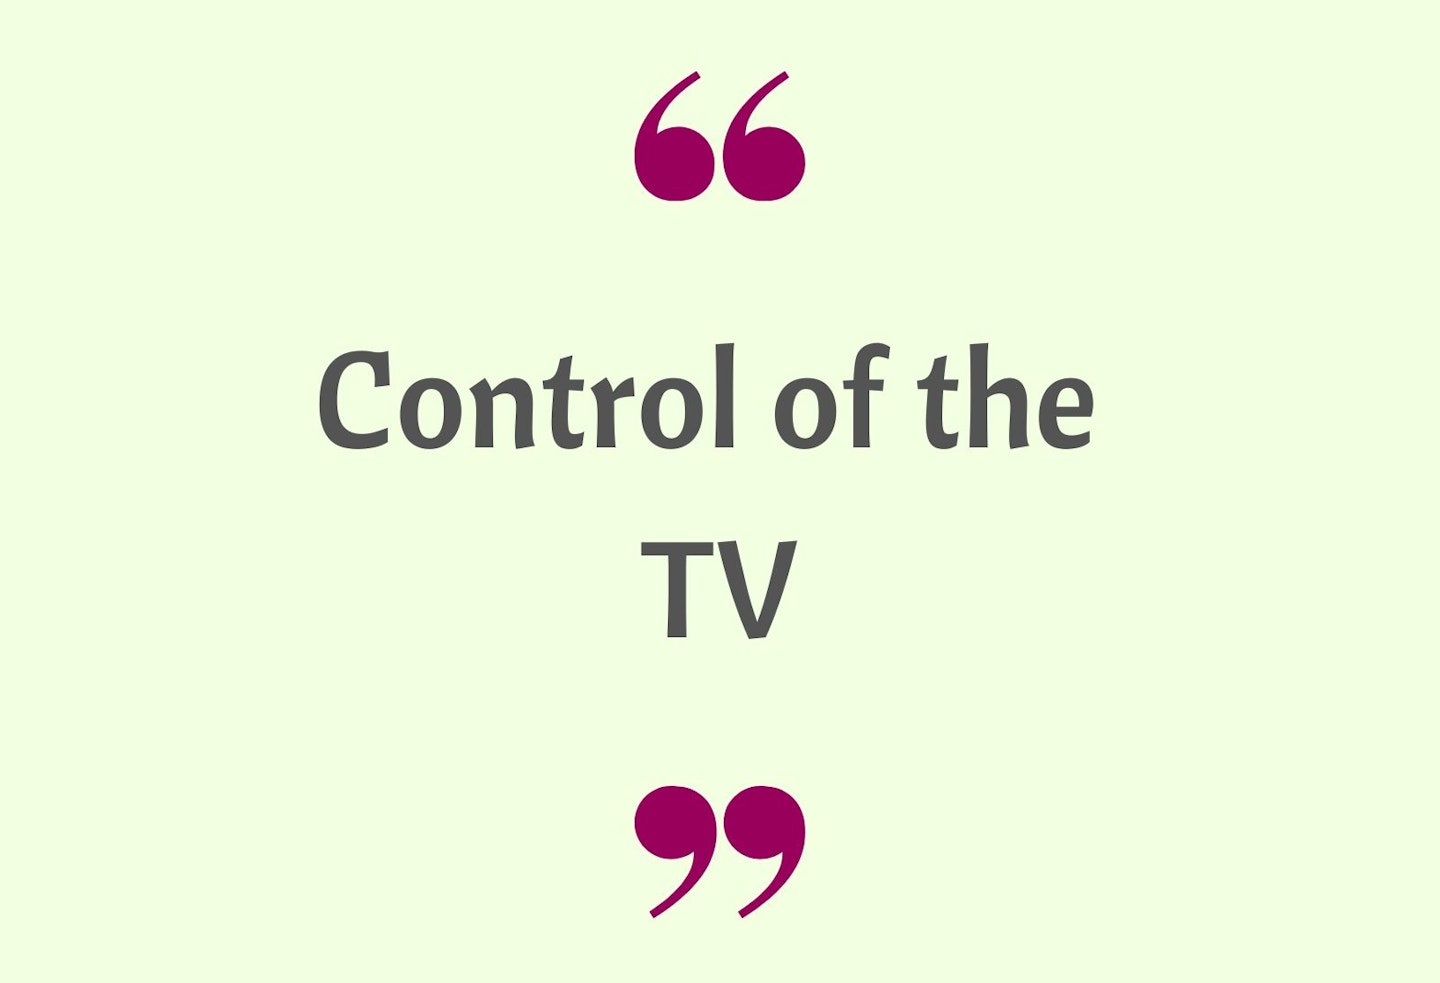 14) Control of the TV